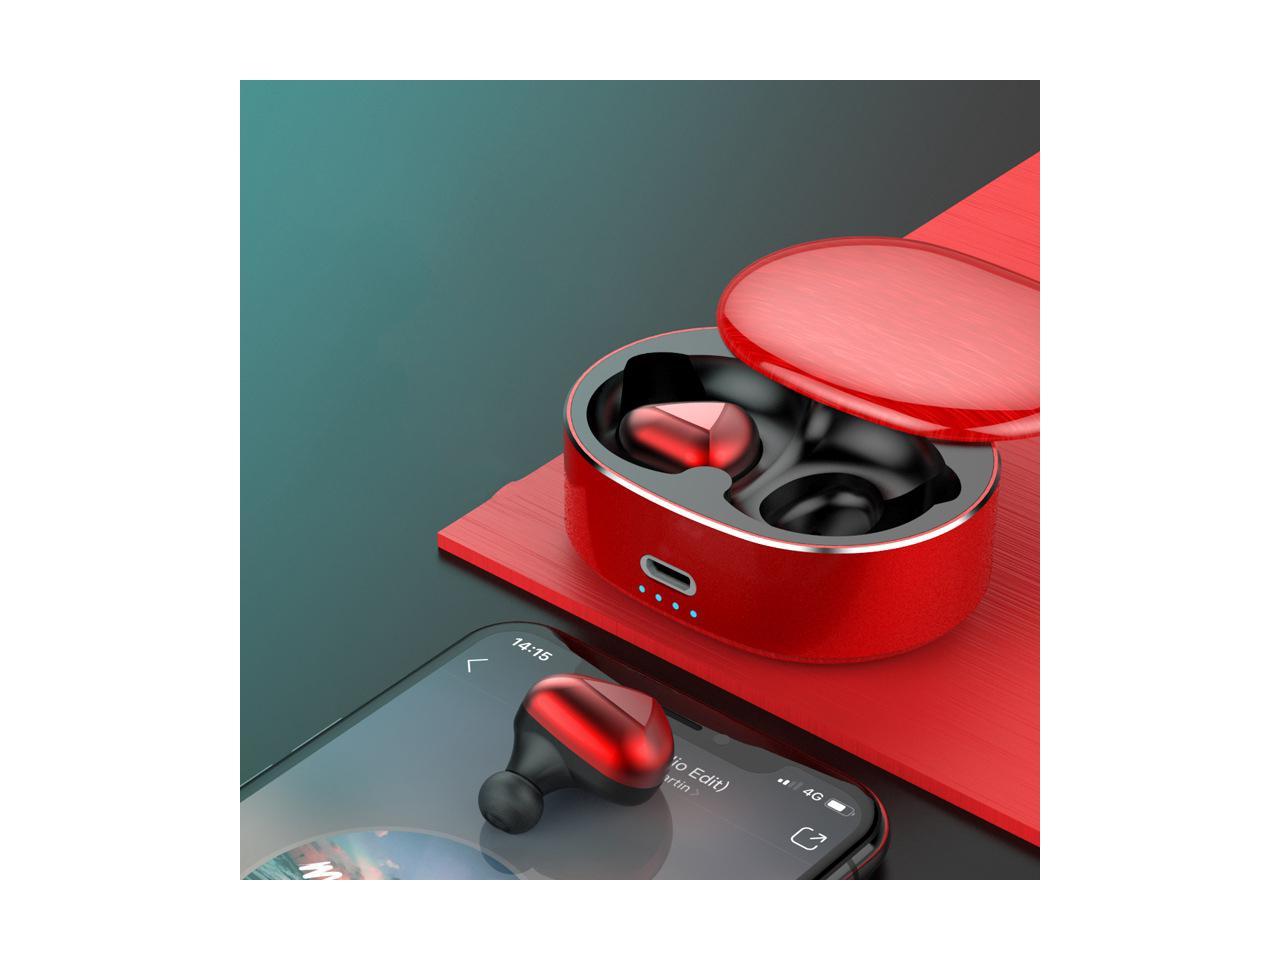 TWS 5.0 Wireless Earphones Bluethooth Earphone Noise Cancelling Earbuds With Mic For Mobile Phone-Red